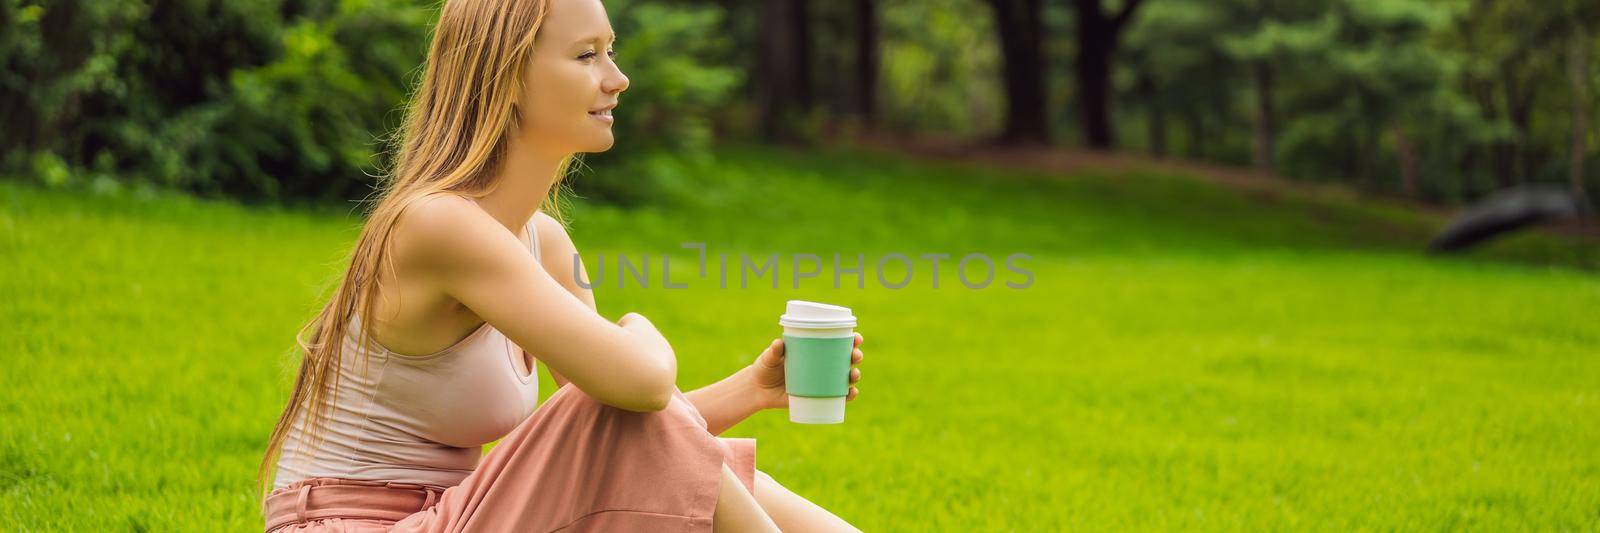 Dreamy young woman having a cup of coffee outside BANNER, LONG FORMAT by galitskaya